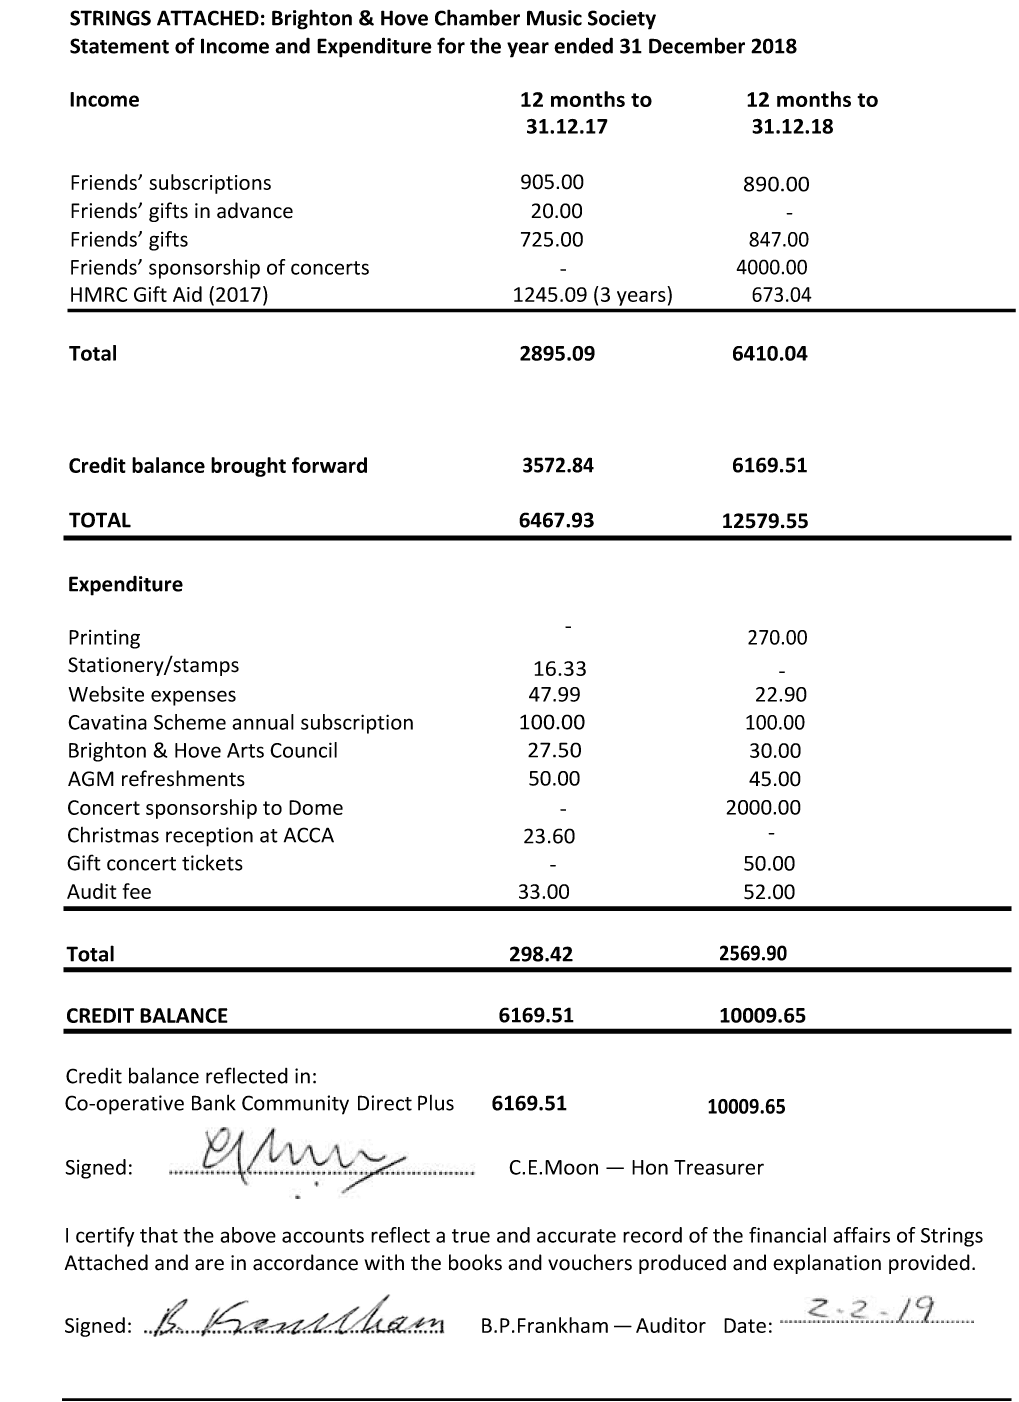 Strings Attached Annual Accounts 2018